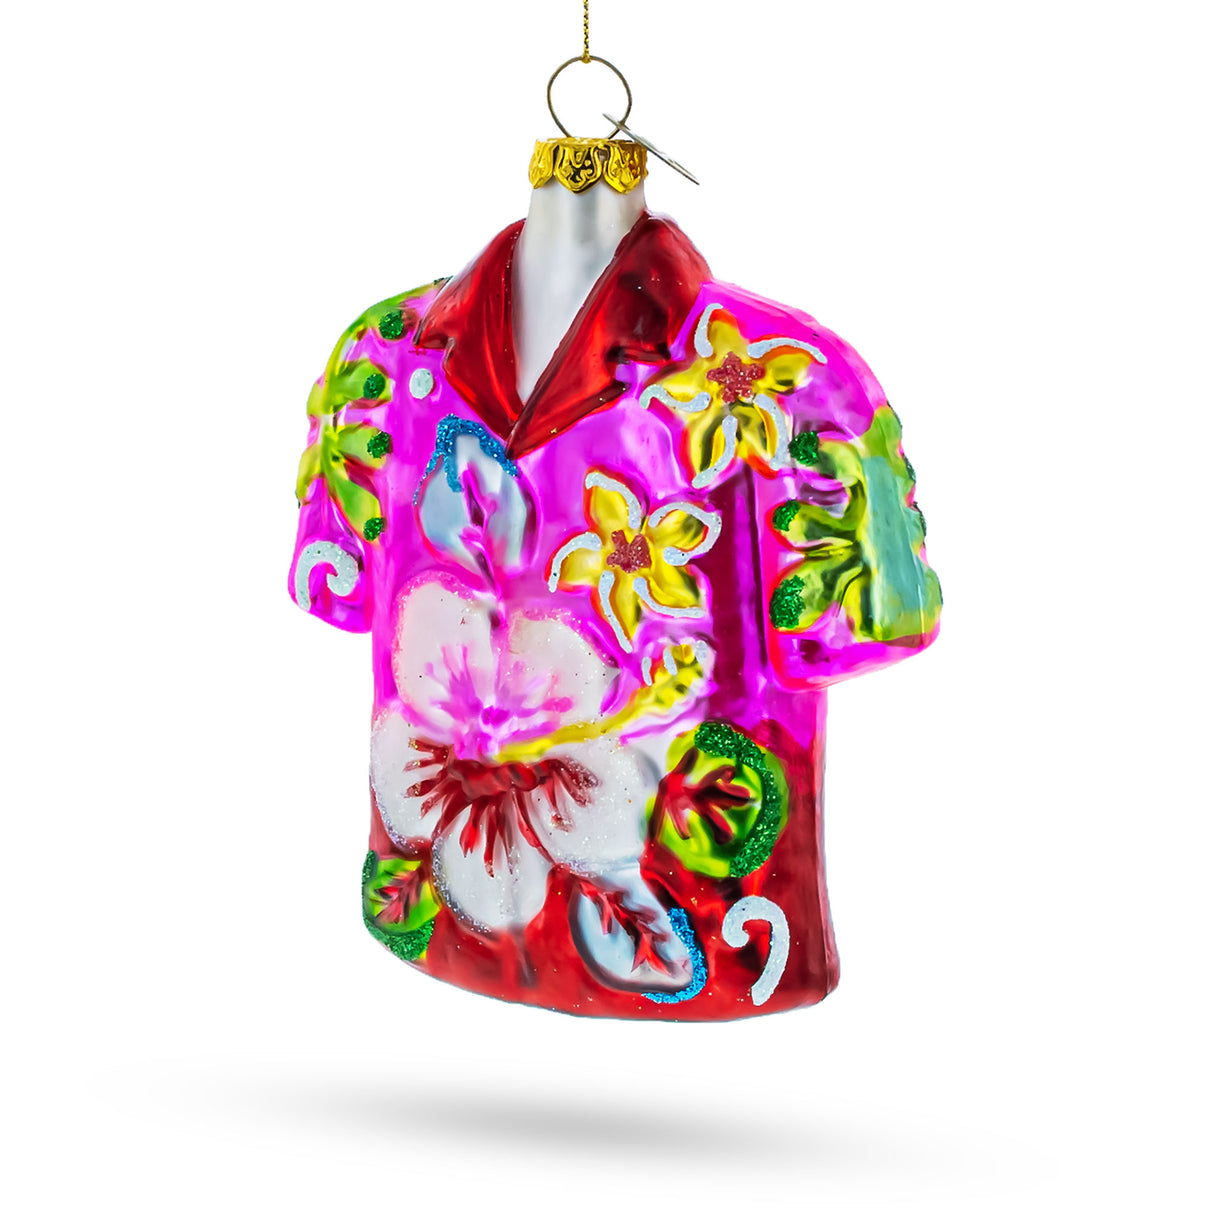 Glass Tropical Short Sleeve Shirt with Flowers - Blown Glass Christmas Ornament in Multi color